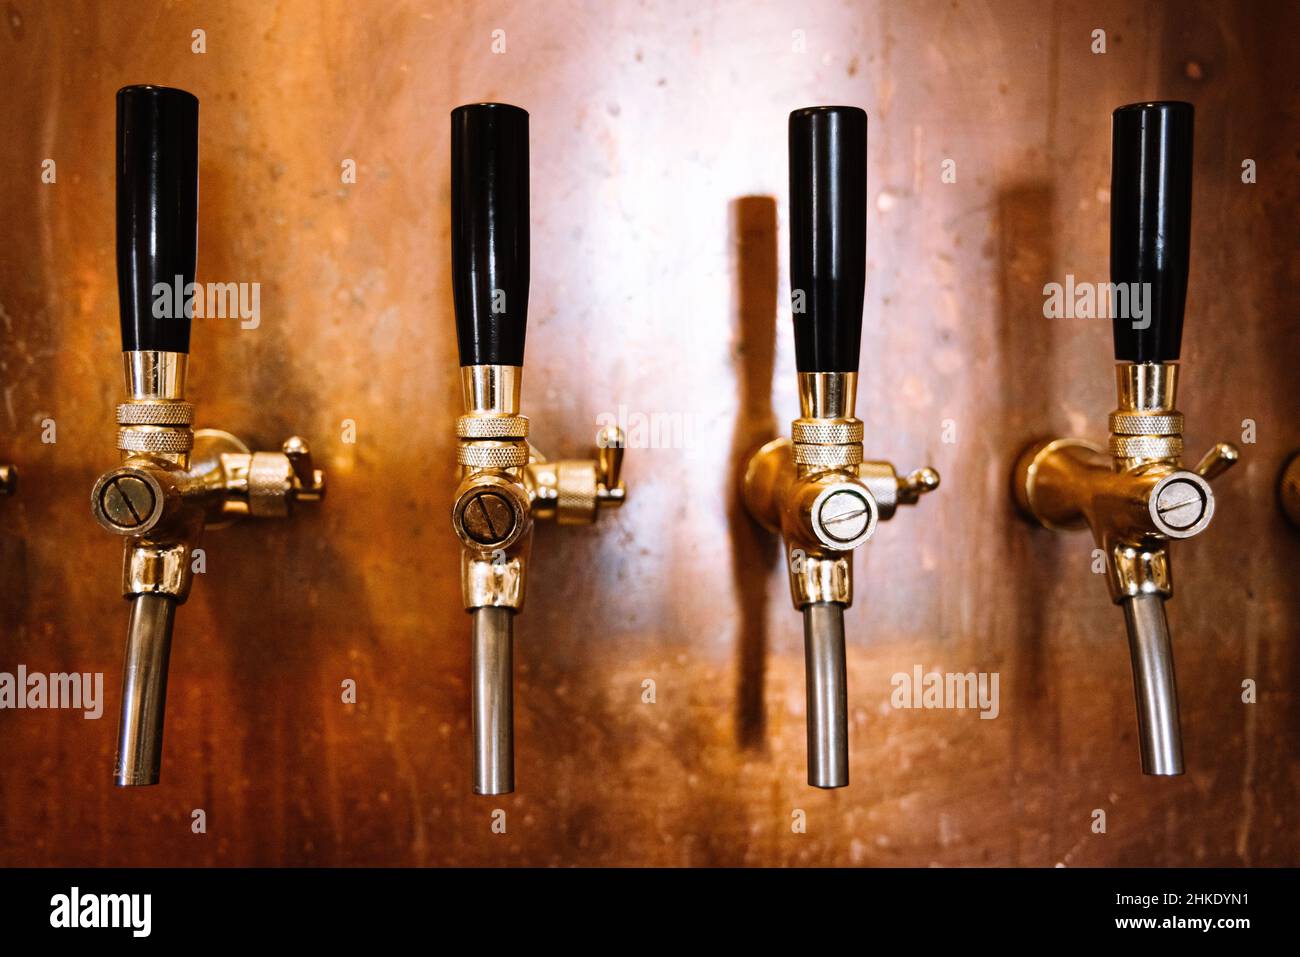 beer tap many in a row bar interior copper wall Stock Photo